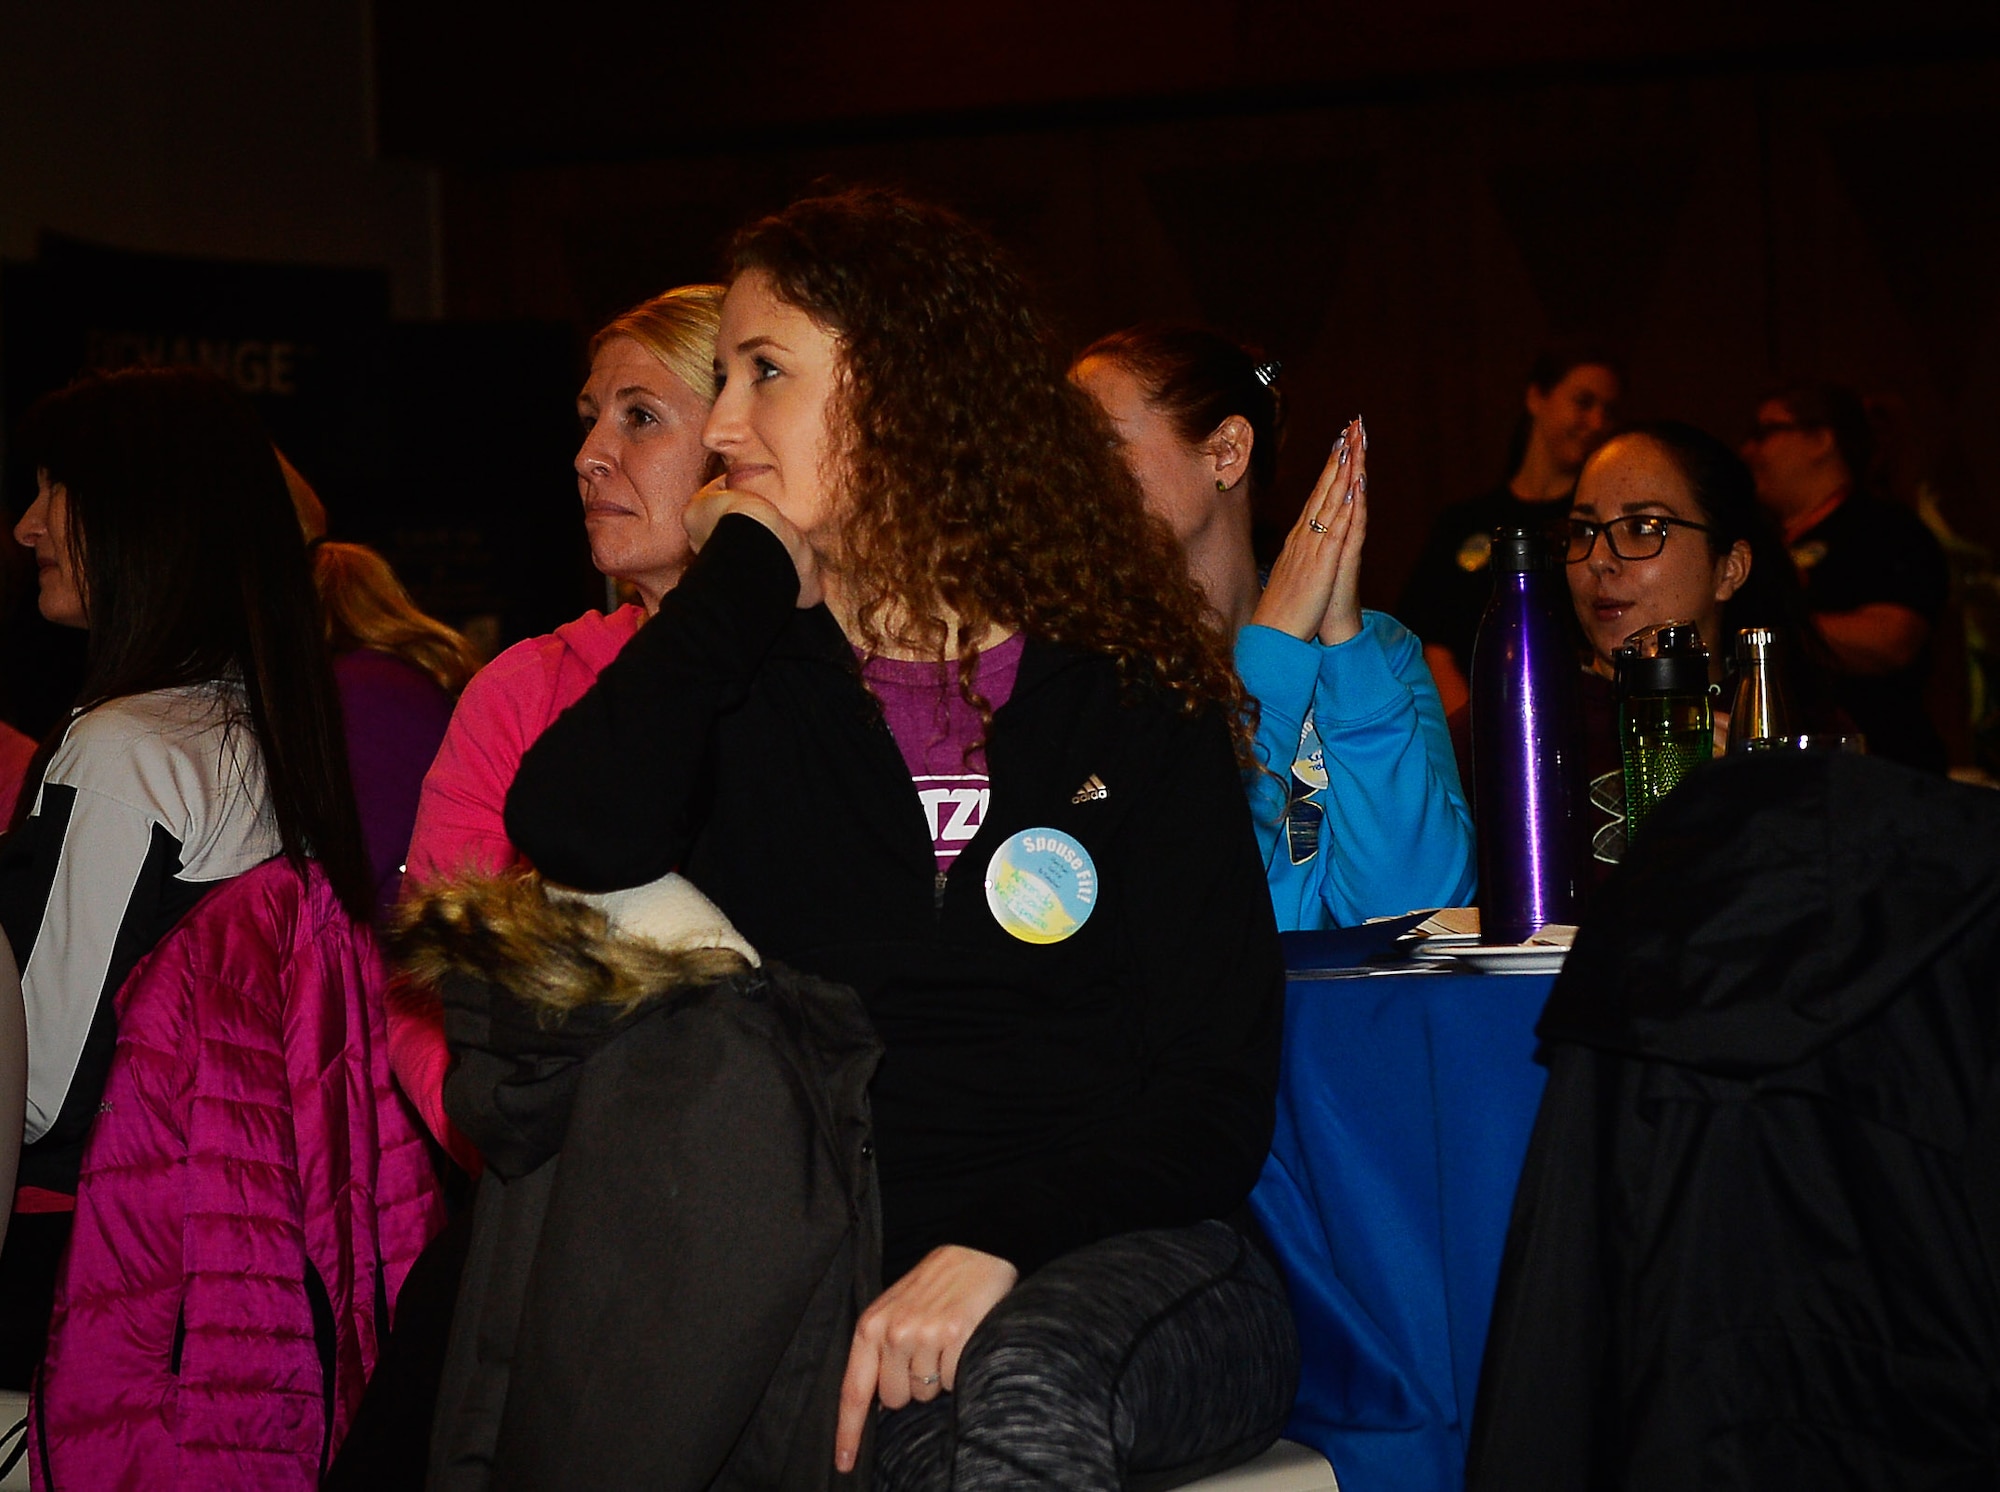 Department of Defense spouses attend the 86th Airlift Wing’s Spouse Fit event Feb. 22 on Ramstein. The two day event aimed to boost morale among DOD spouses and featured games, volunteer fairs, resiliency lessons, a self-defense demonstration and a yoga session.